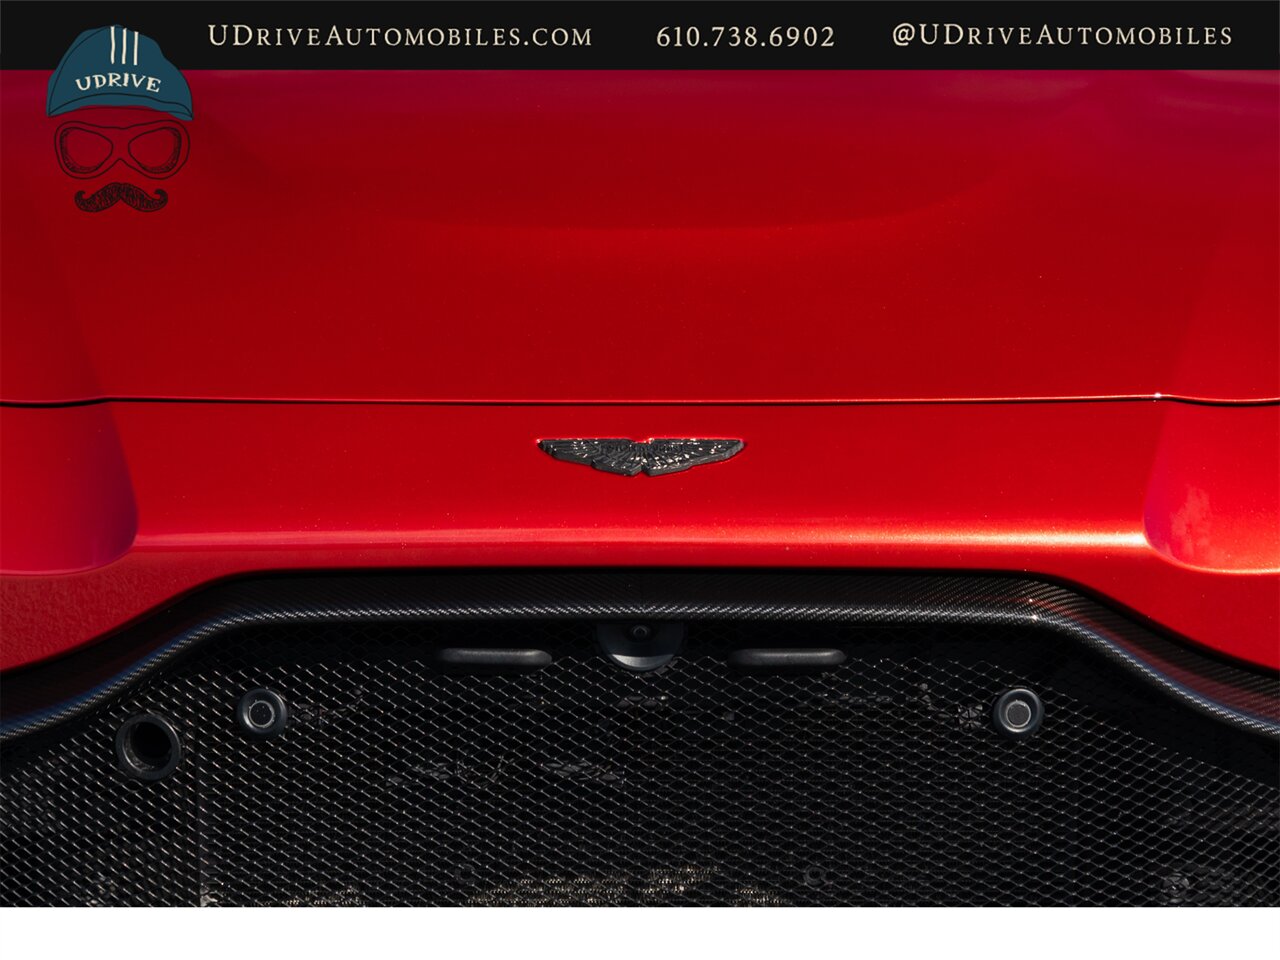 2019 Aston Martin Vantage  Incredibly Spec Rare Q Exclusive Fiamma Red $222k MSRP 1 of a Kind CPO - Photo 15 - West Chester, PA 19382